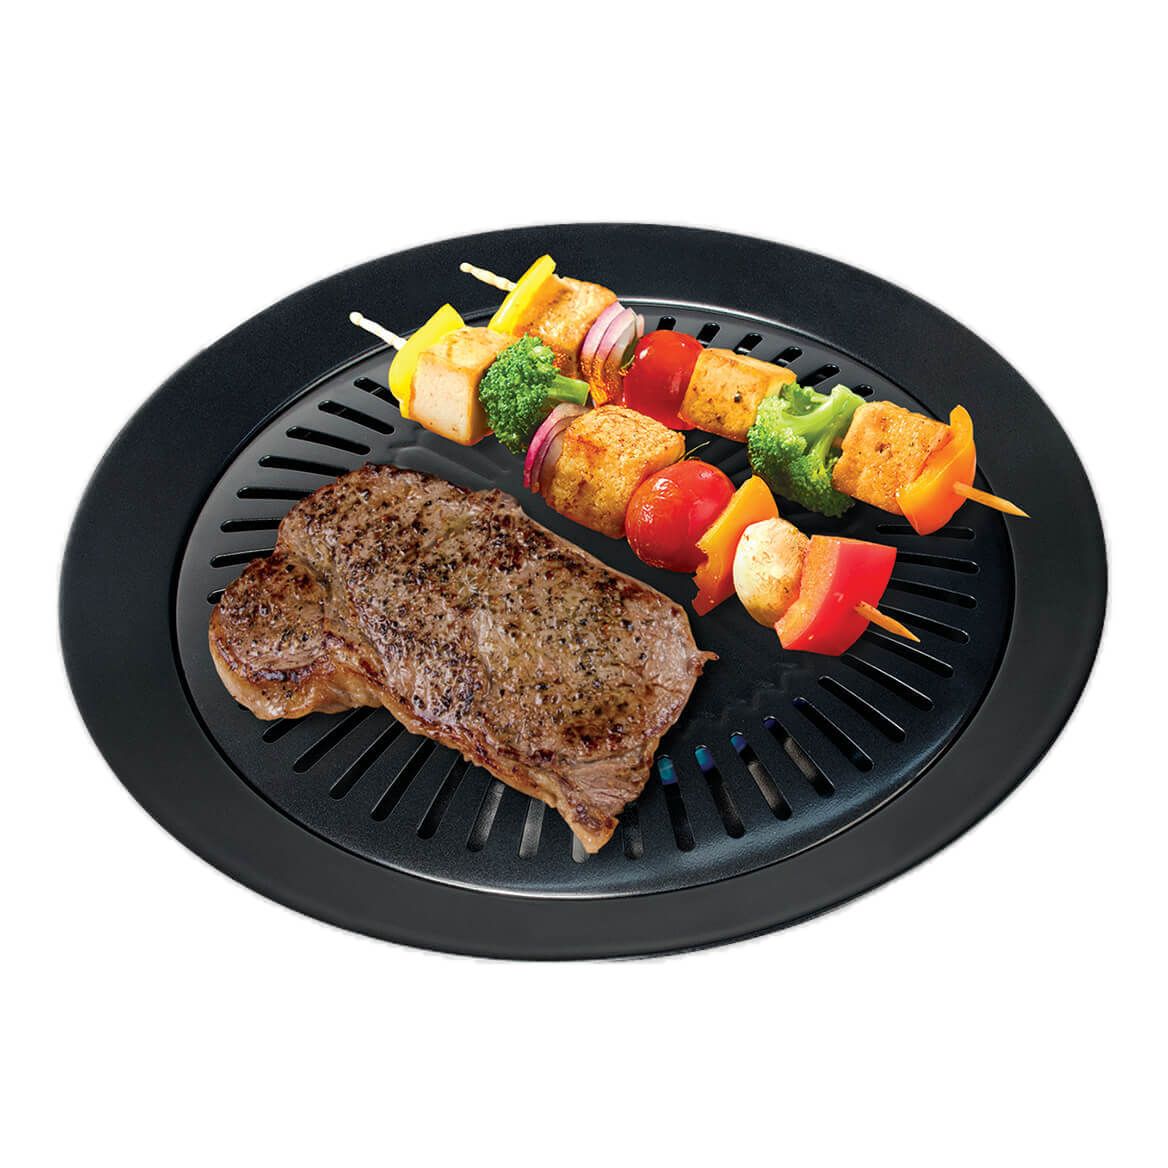 Stove Top Grill + '-' + 356133